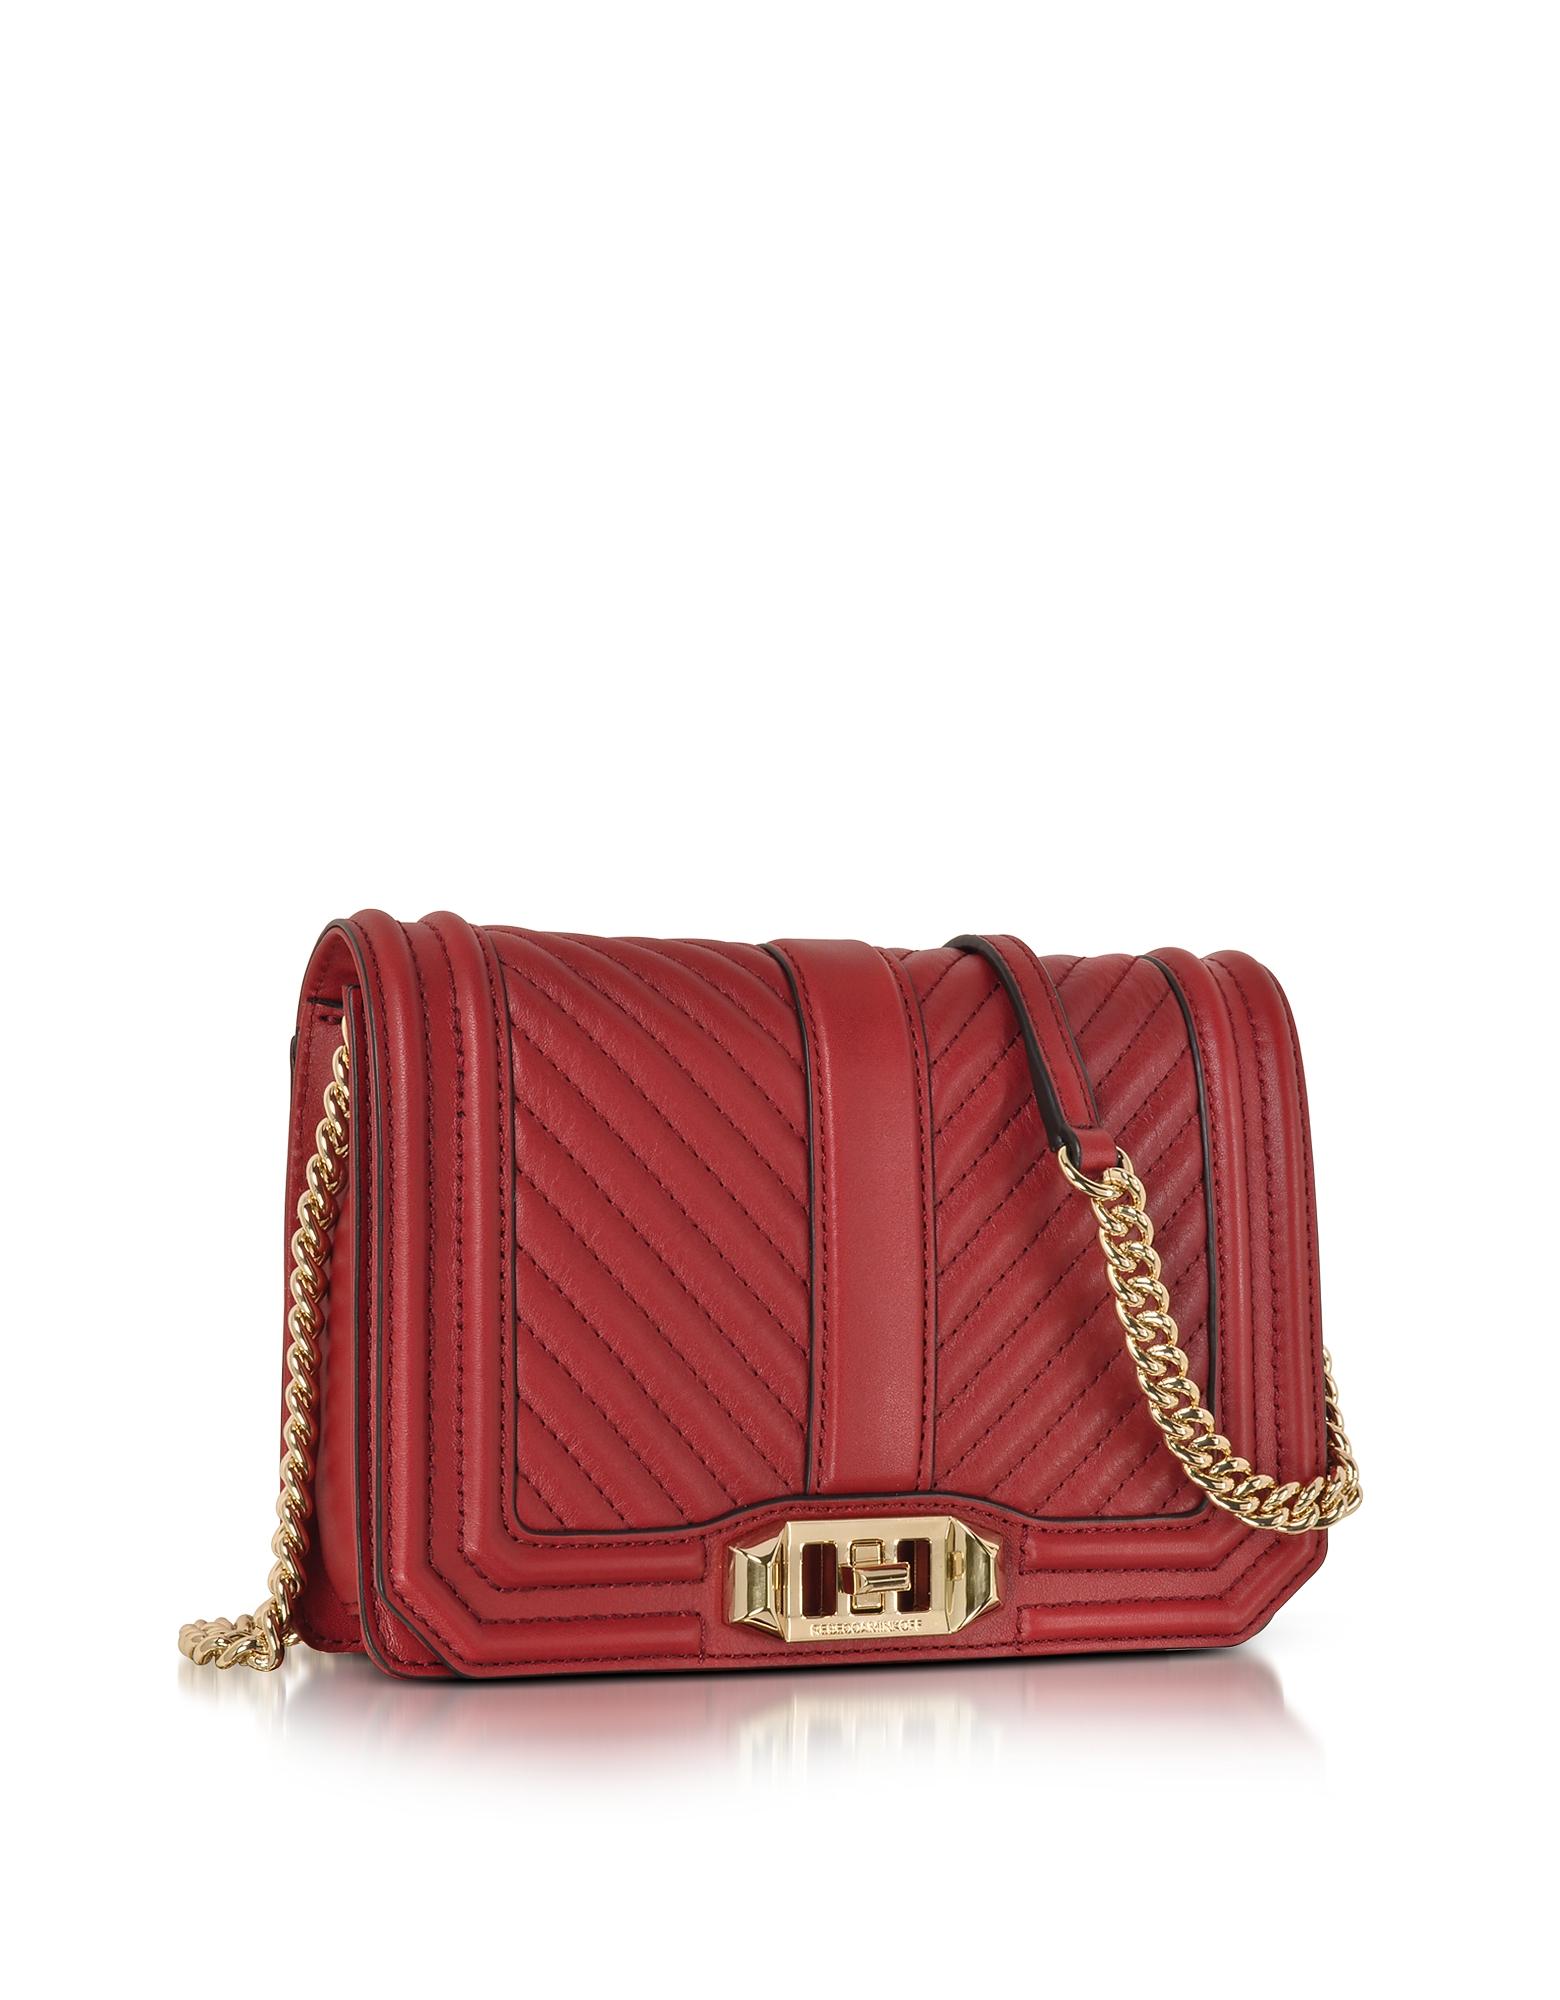 Lyst - Rebecca Minkoff Red Quilted Leather Small Love Crossbody Bag in Red